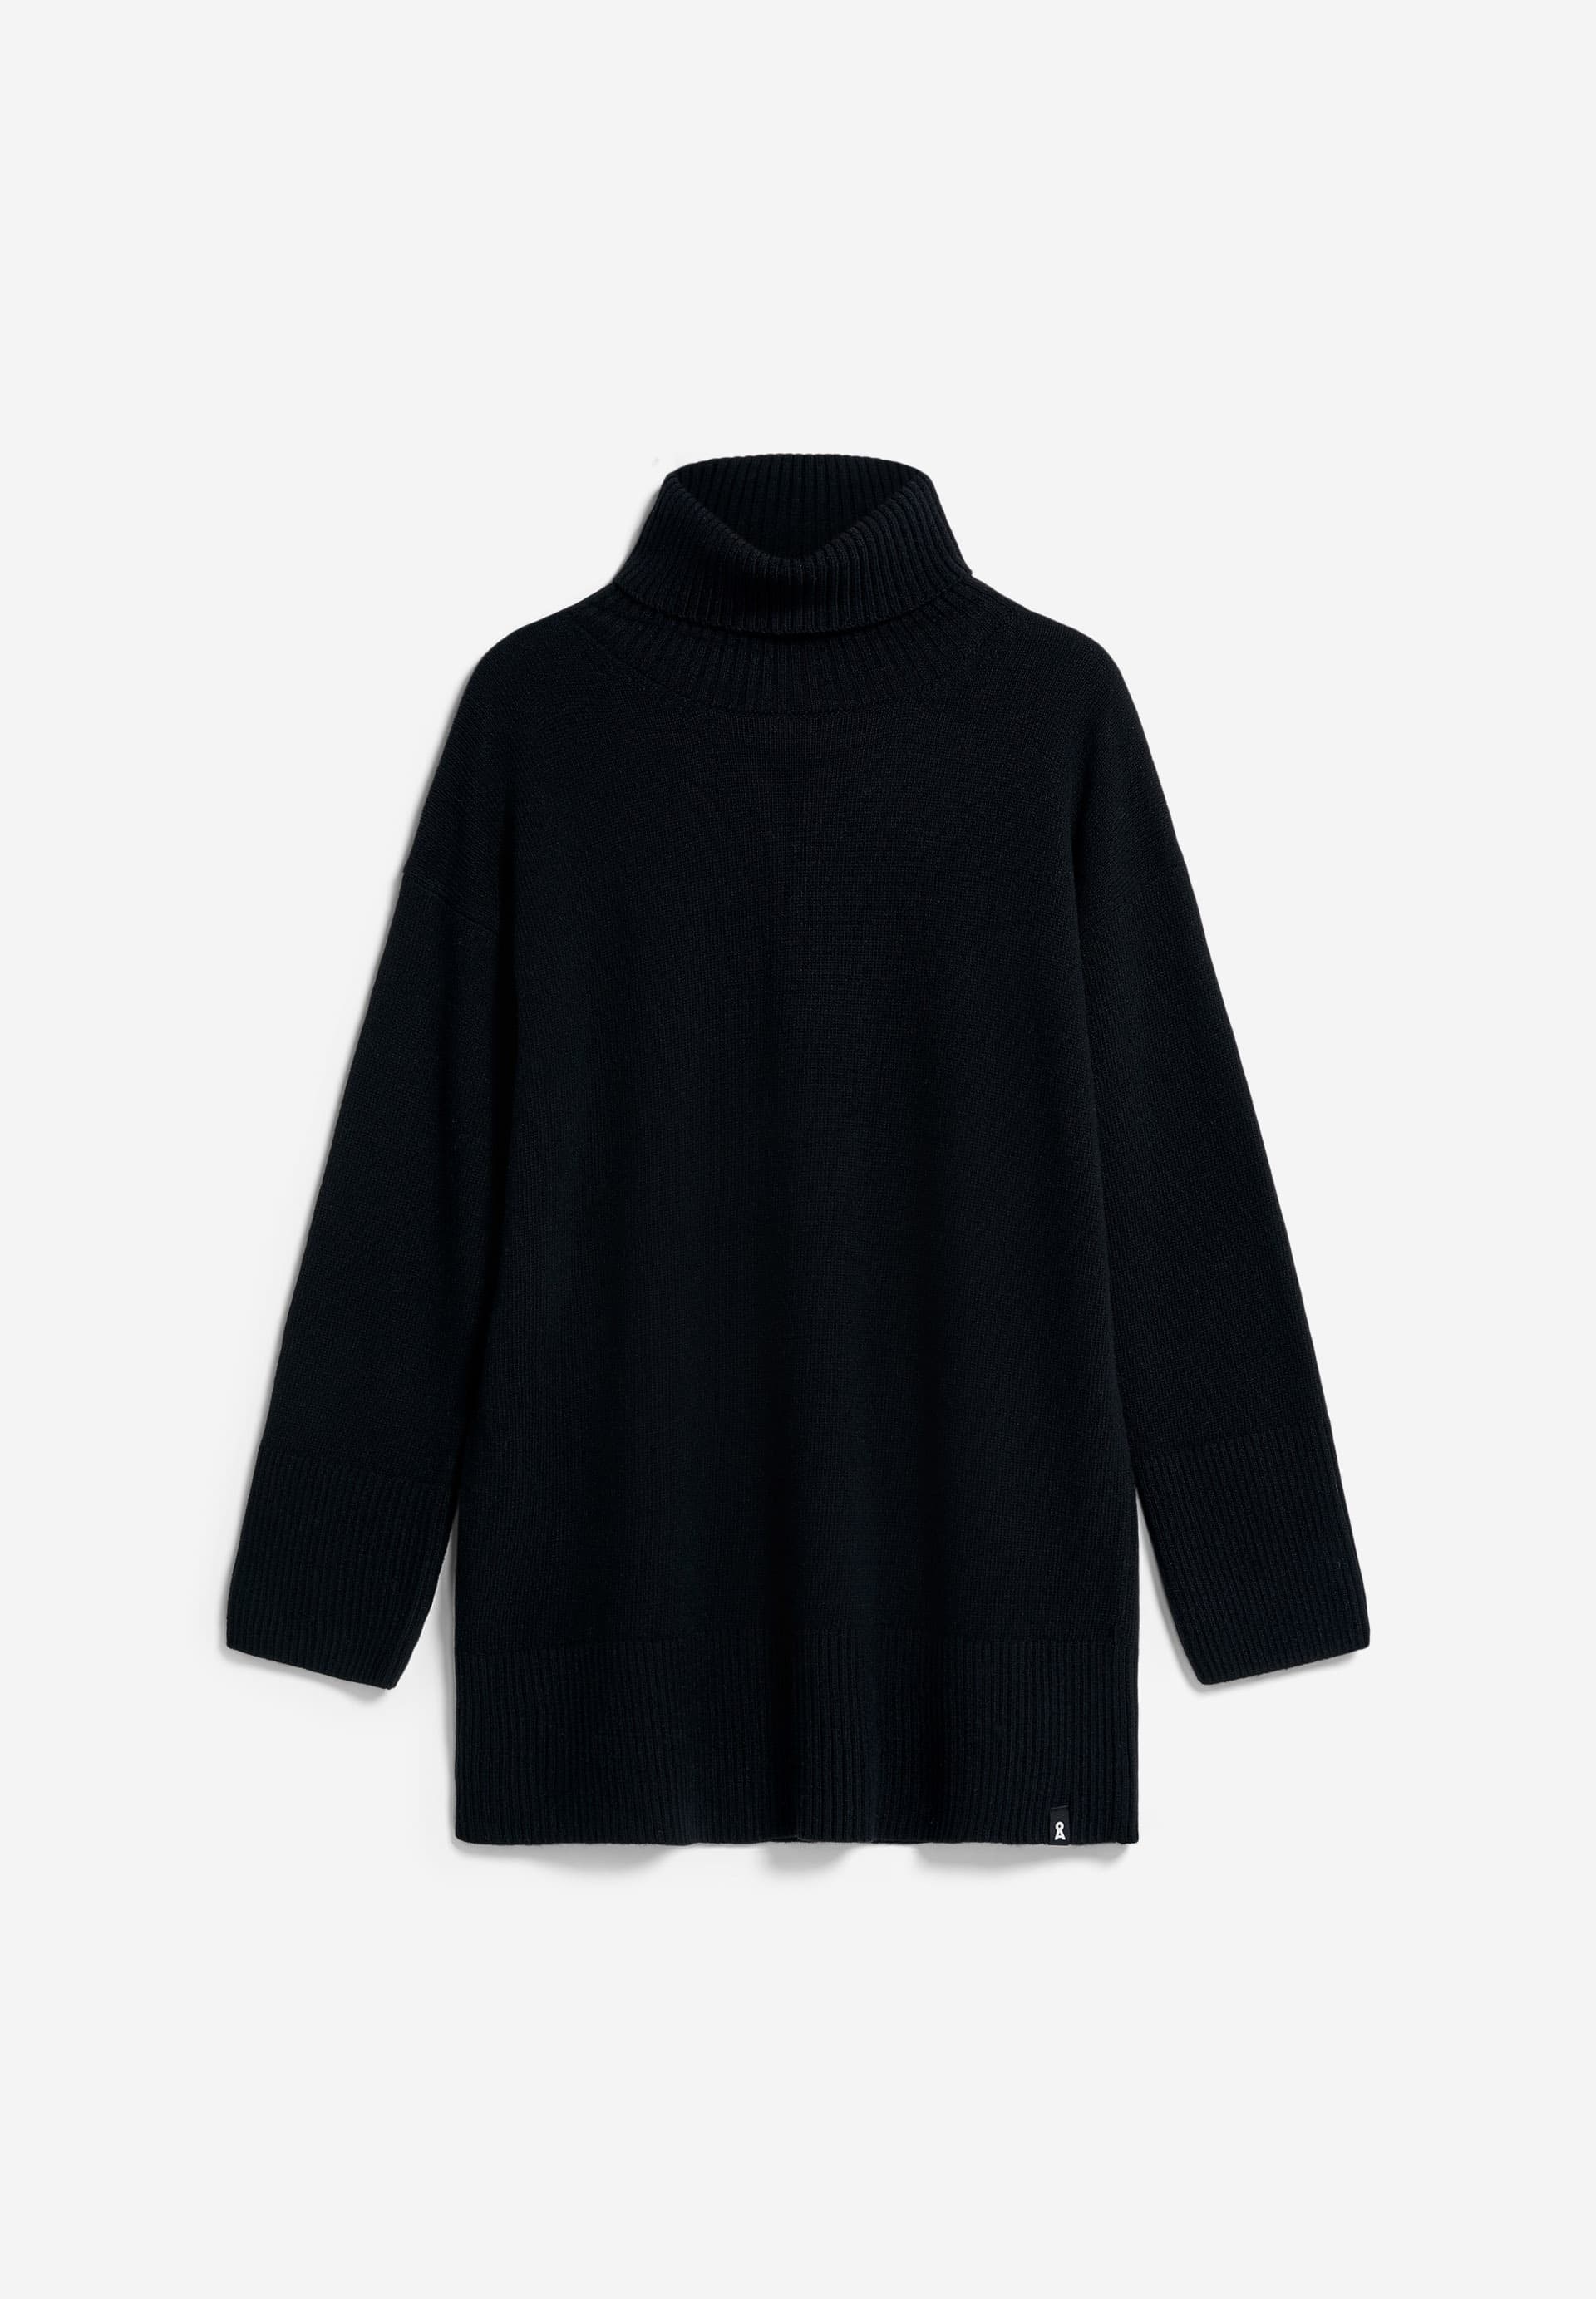 ARDIAA ROLLNECK Sweater Loose Fit made of Organic Wool Mix